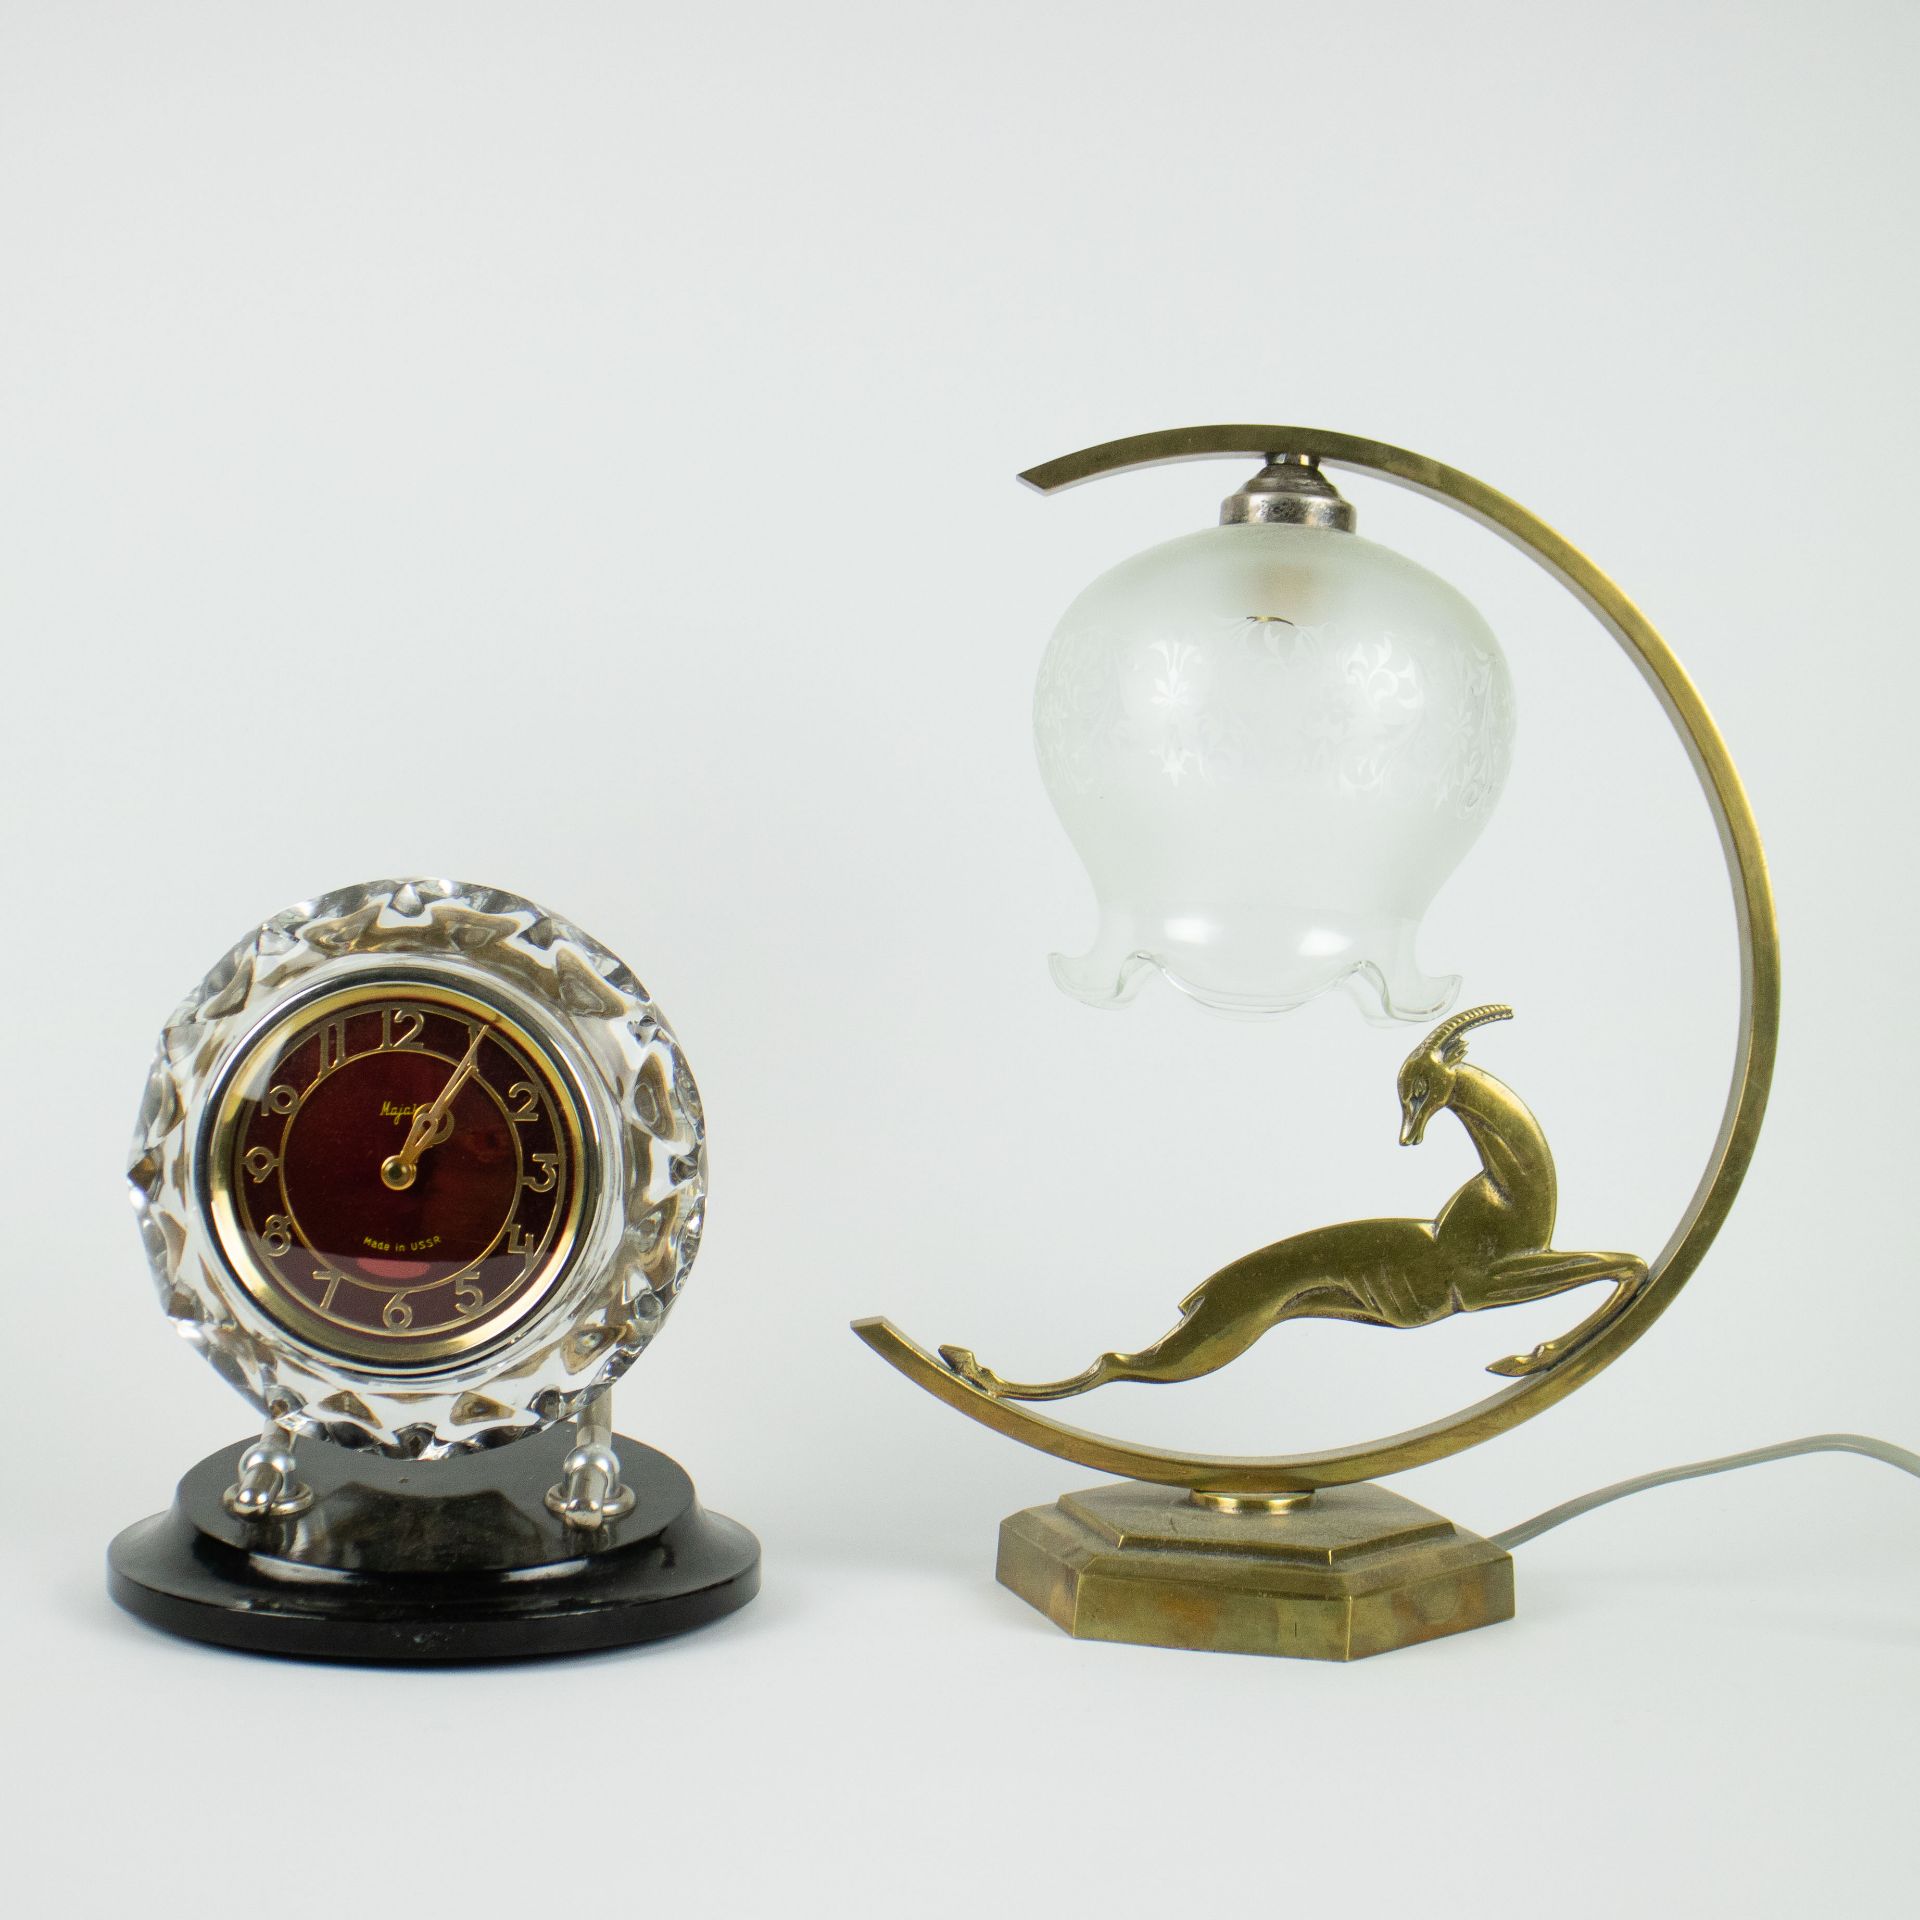 An Art Deco lampadaire with antelope and a Russian alarm clock (USSR)